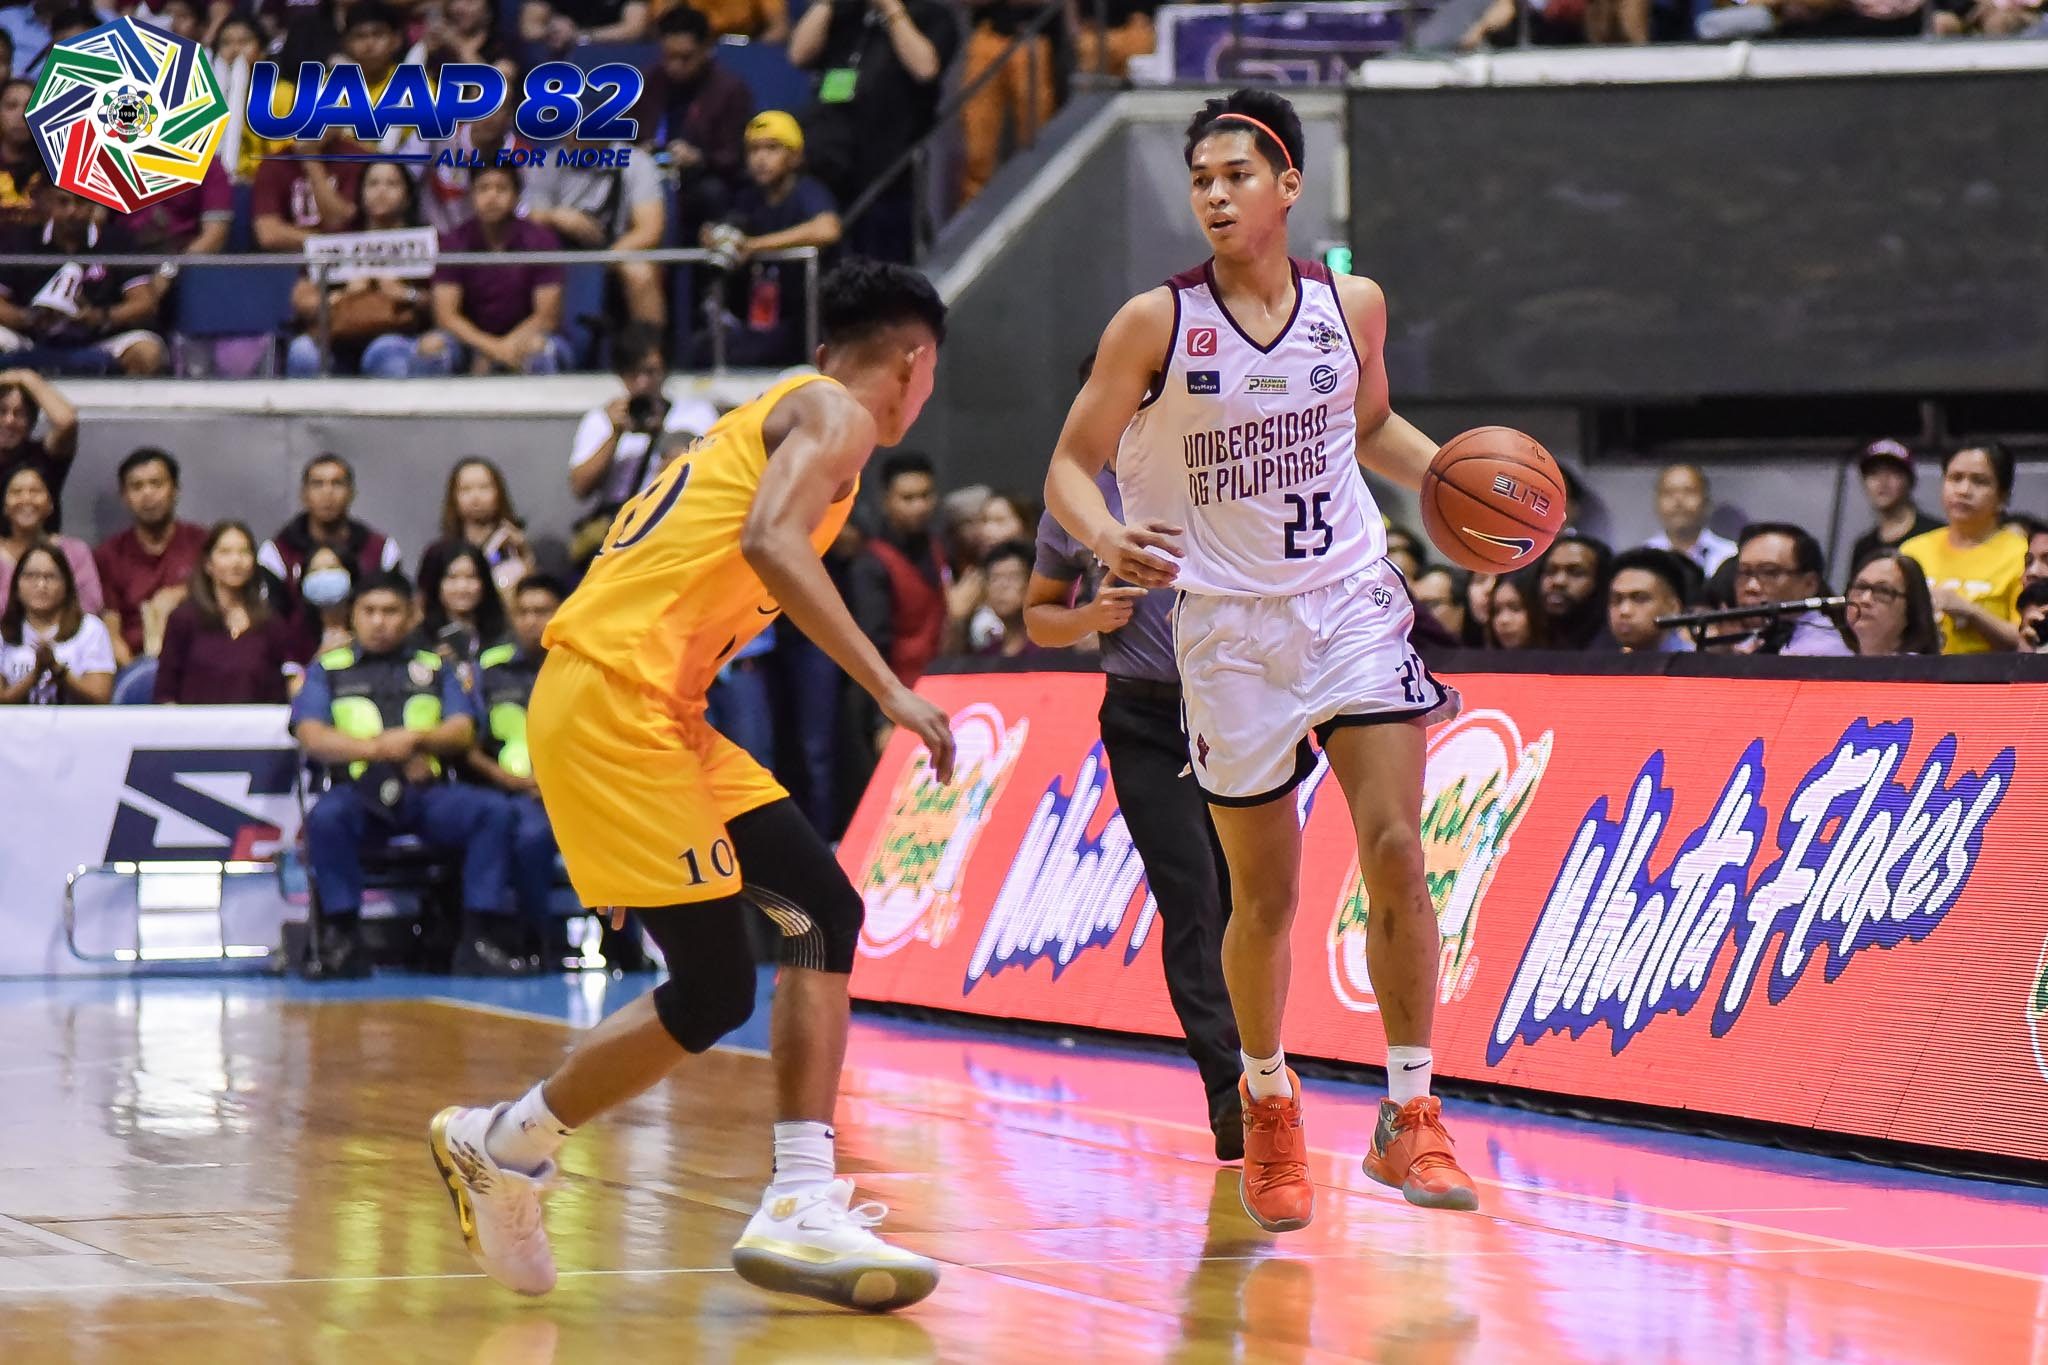 UAAP eligibility to be tackled at ‘proper time’ as Season 83 folds